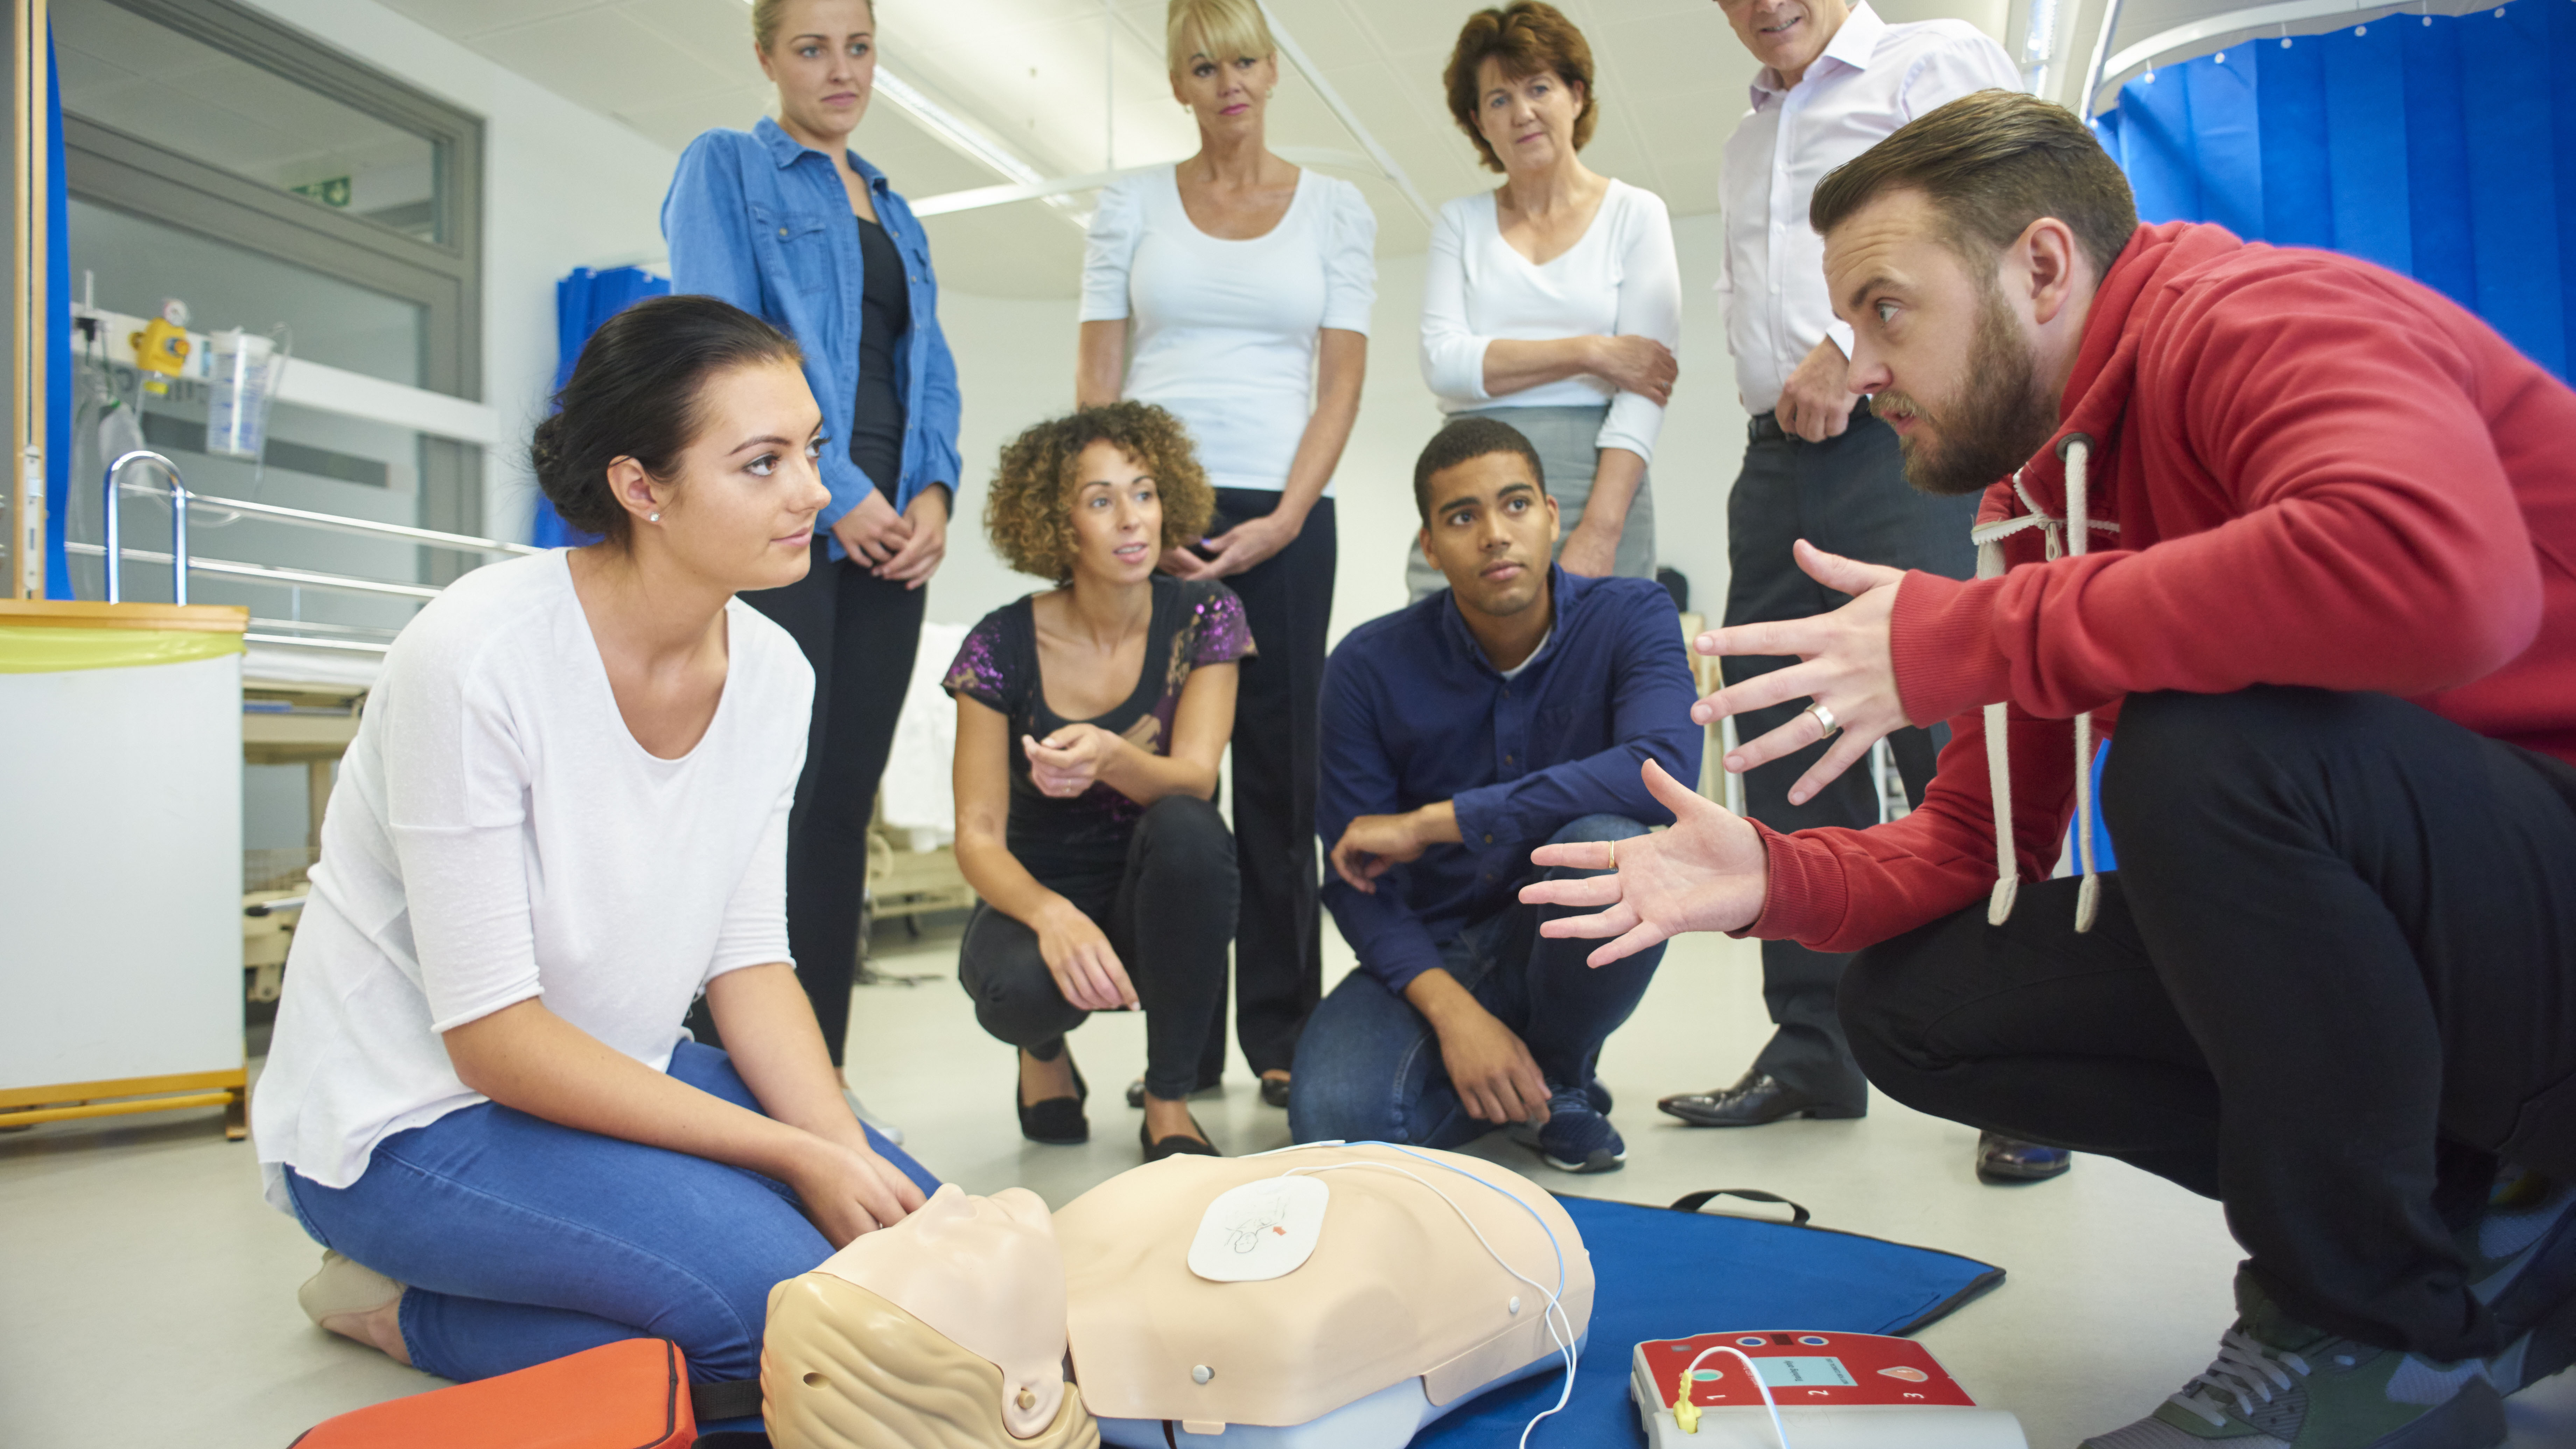 a mixed age group listen to their tutor as he shows the procedure involved to resuscitate using a defibrillator